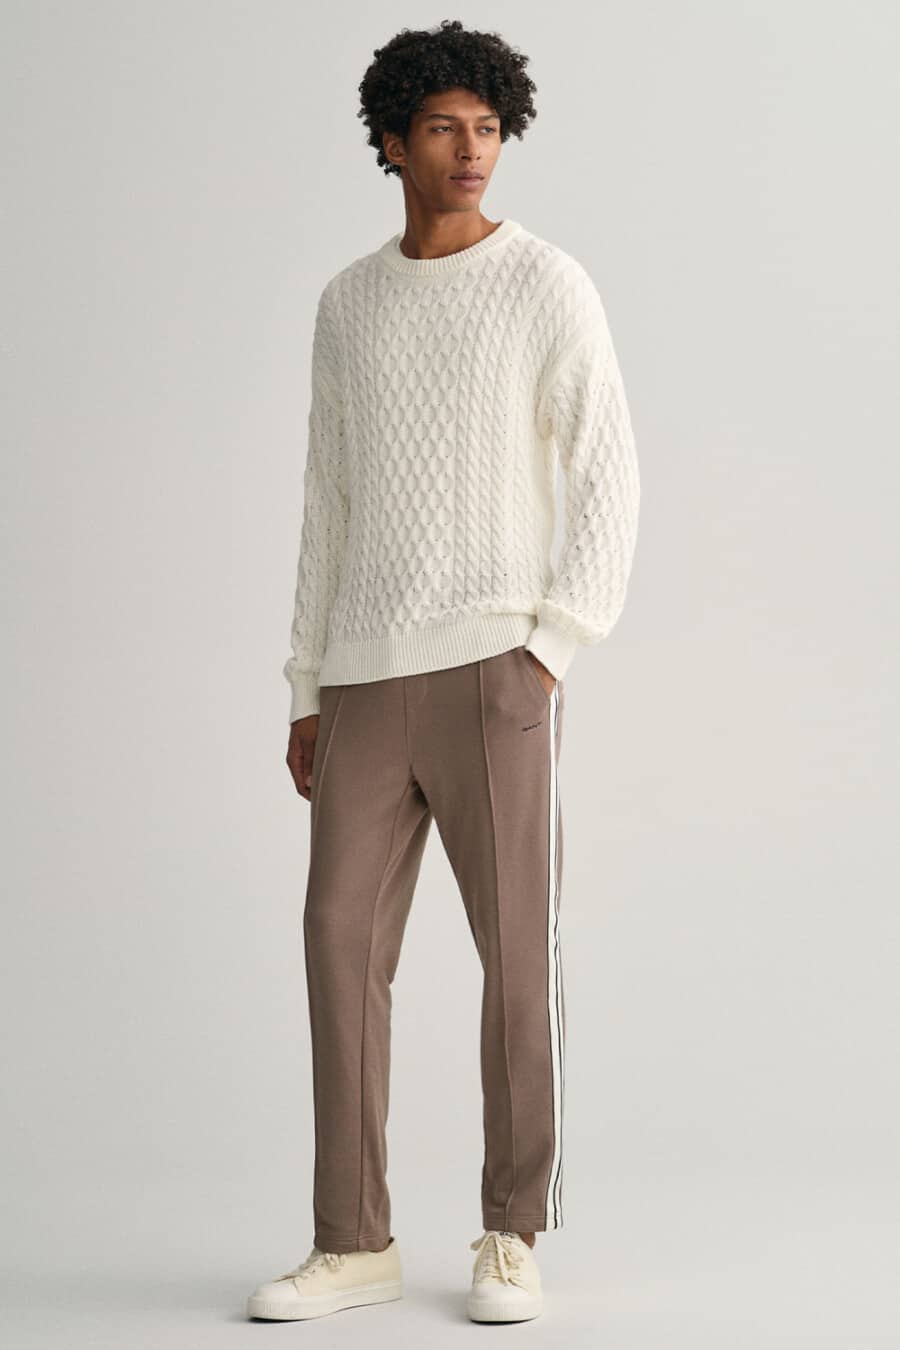 Men's brown trackpants, white cable knit sweater and off-white canvas sneakers outfit